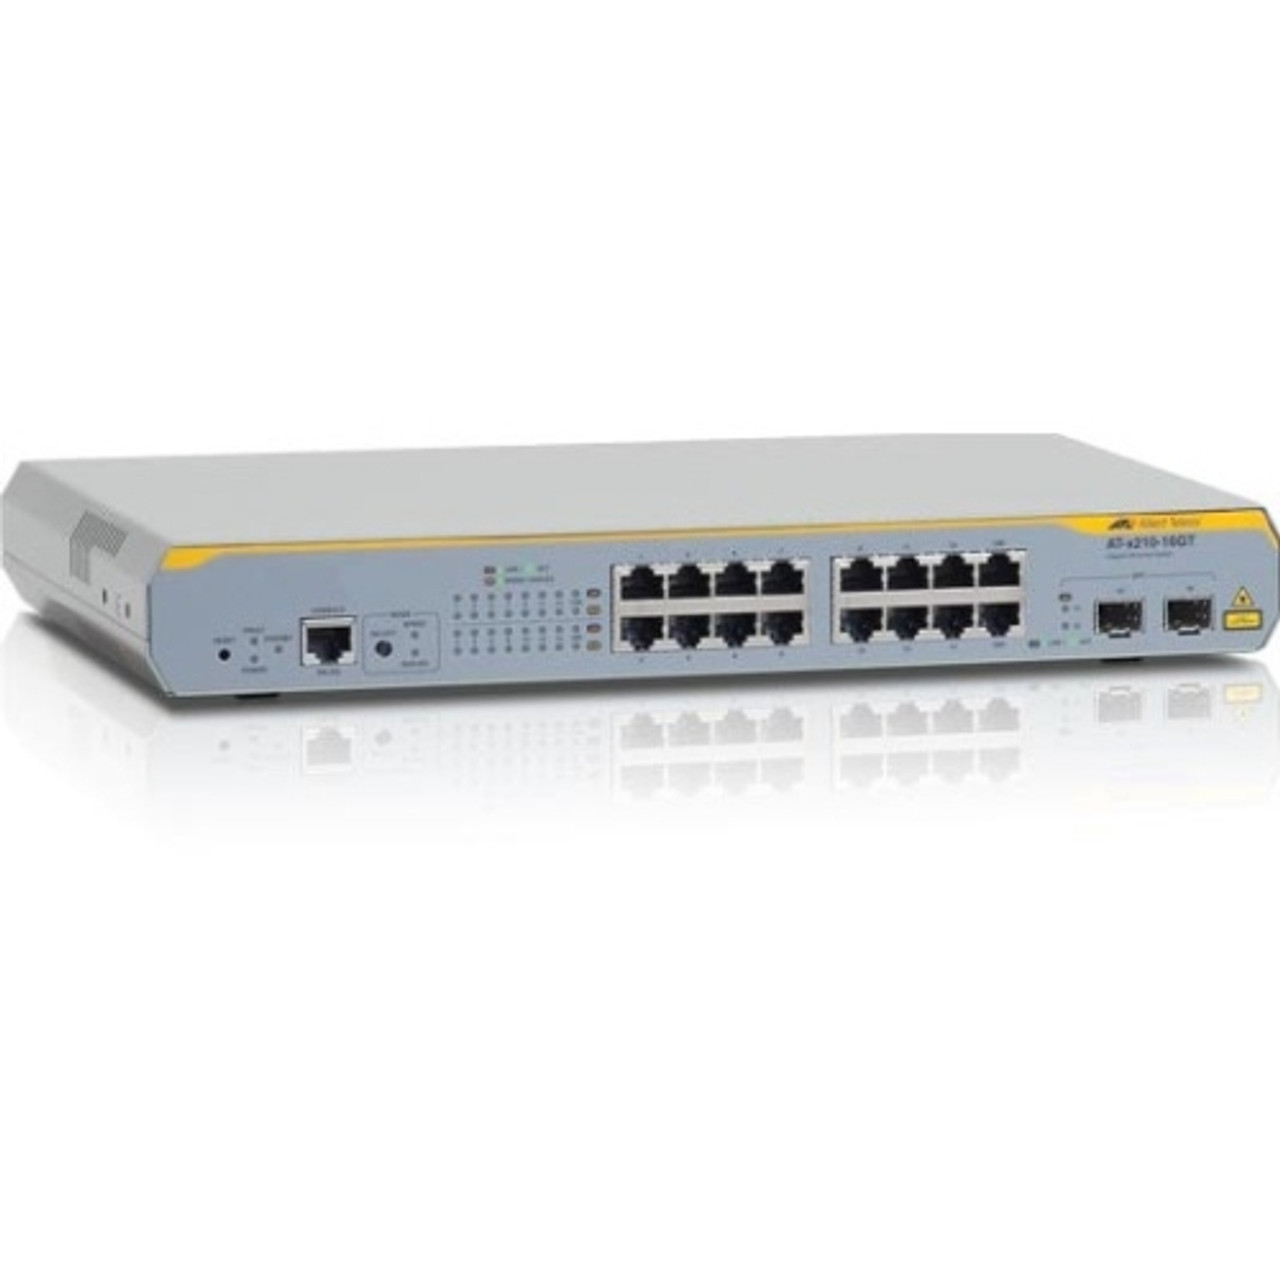 AT-X210-16GT-90 Allied Telesis X210 Series 14-Ports 10/100/1000Base-T Layer 2+ Switch with 2x SFP Combo Ports (Refurbished)